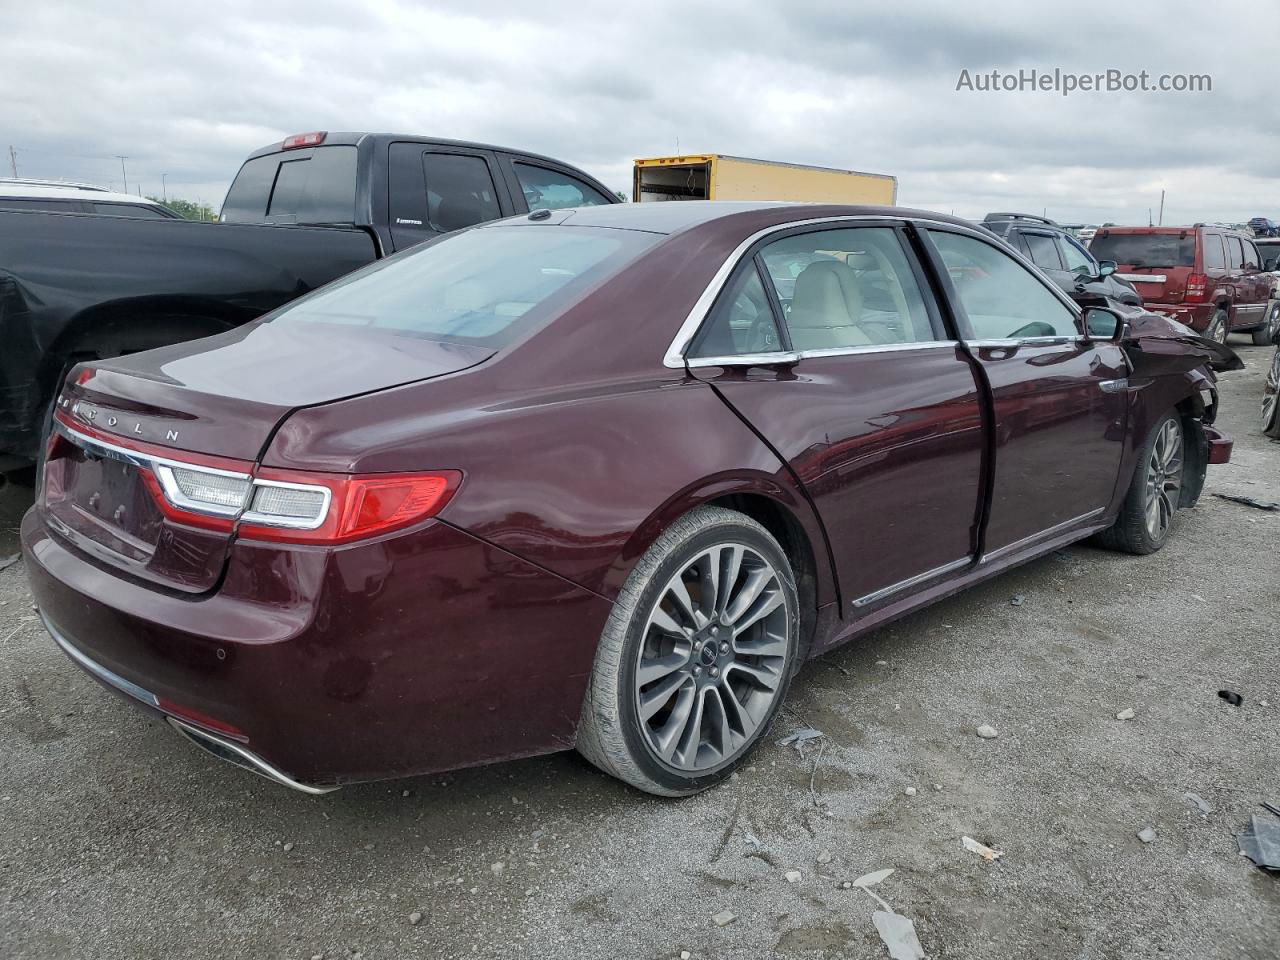 2017 Lincoln Continental Reserve Бордовый vin: 1LN6L9RP7H5614589